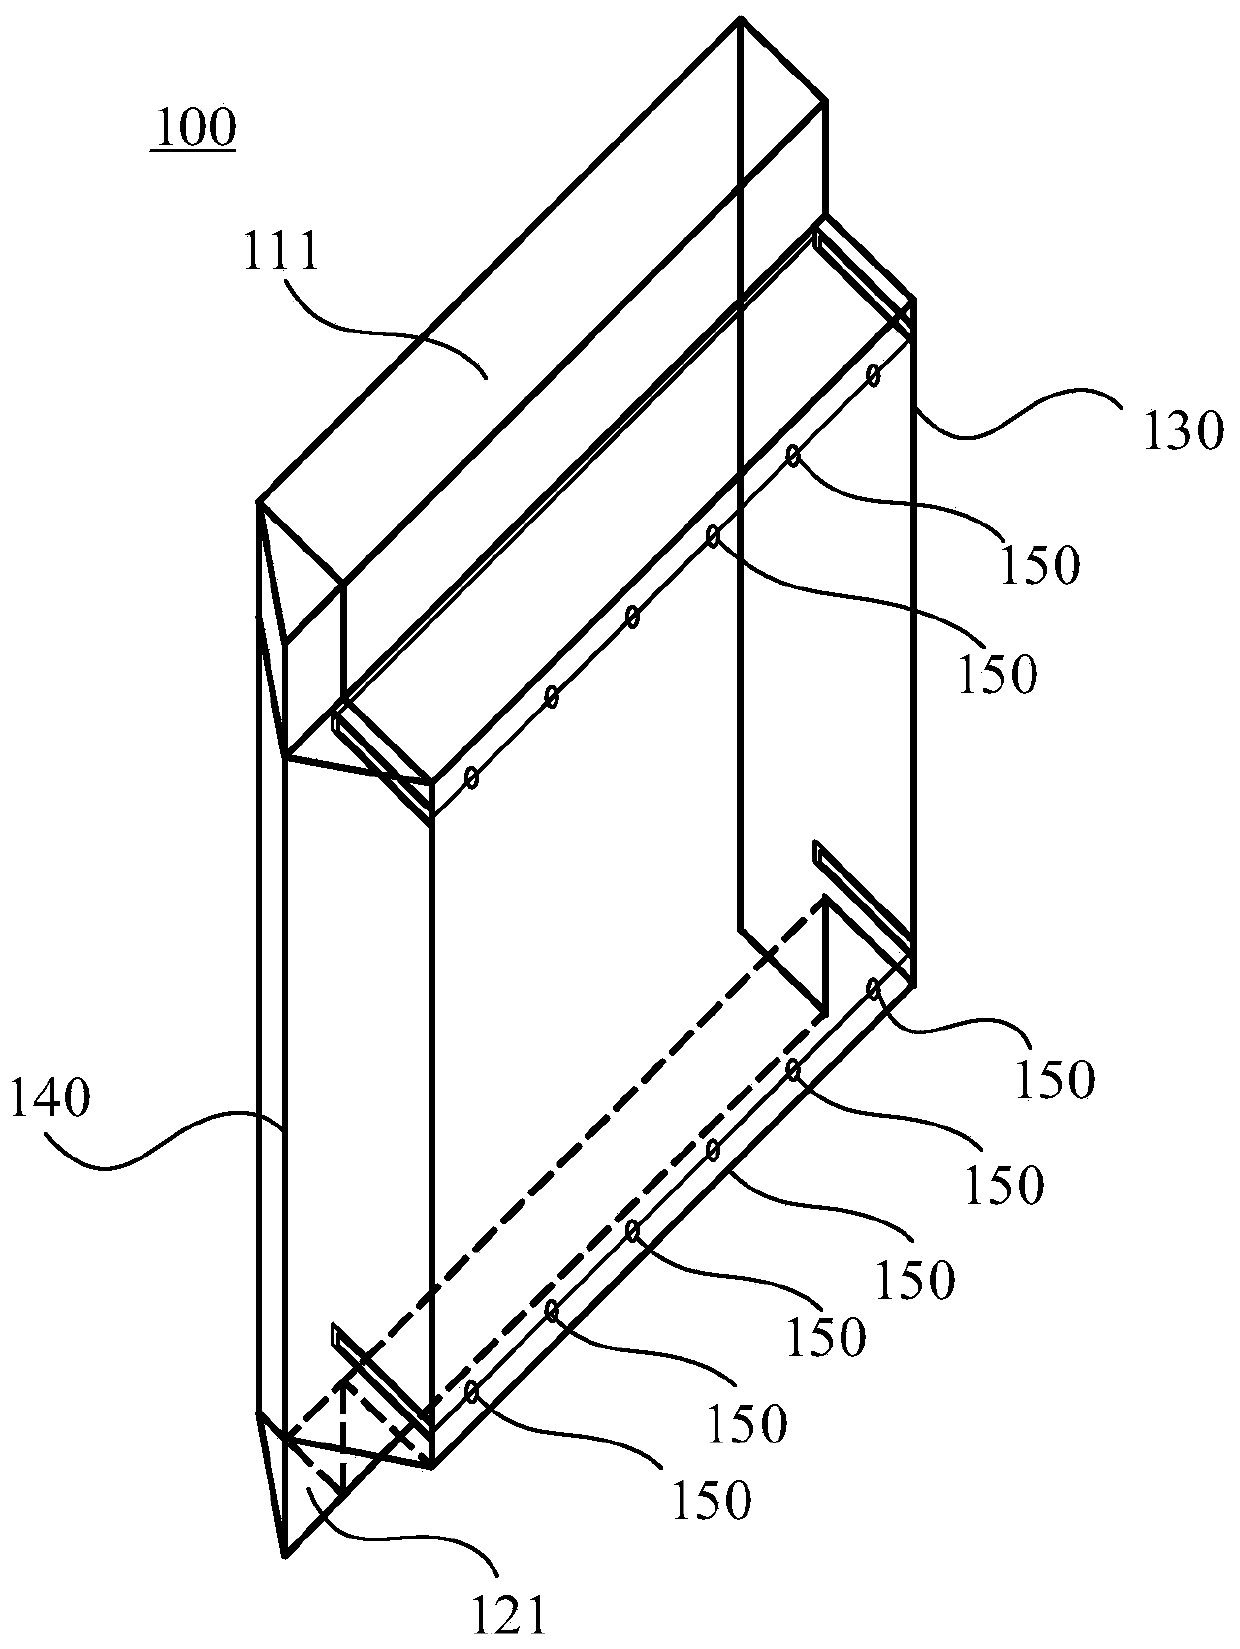 Fabricated cable trench and construction method